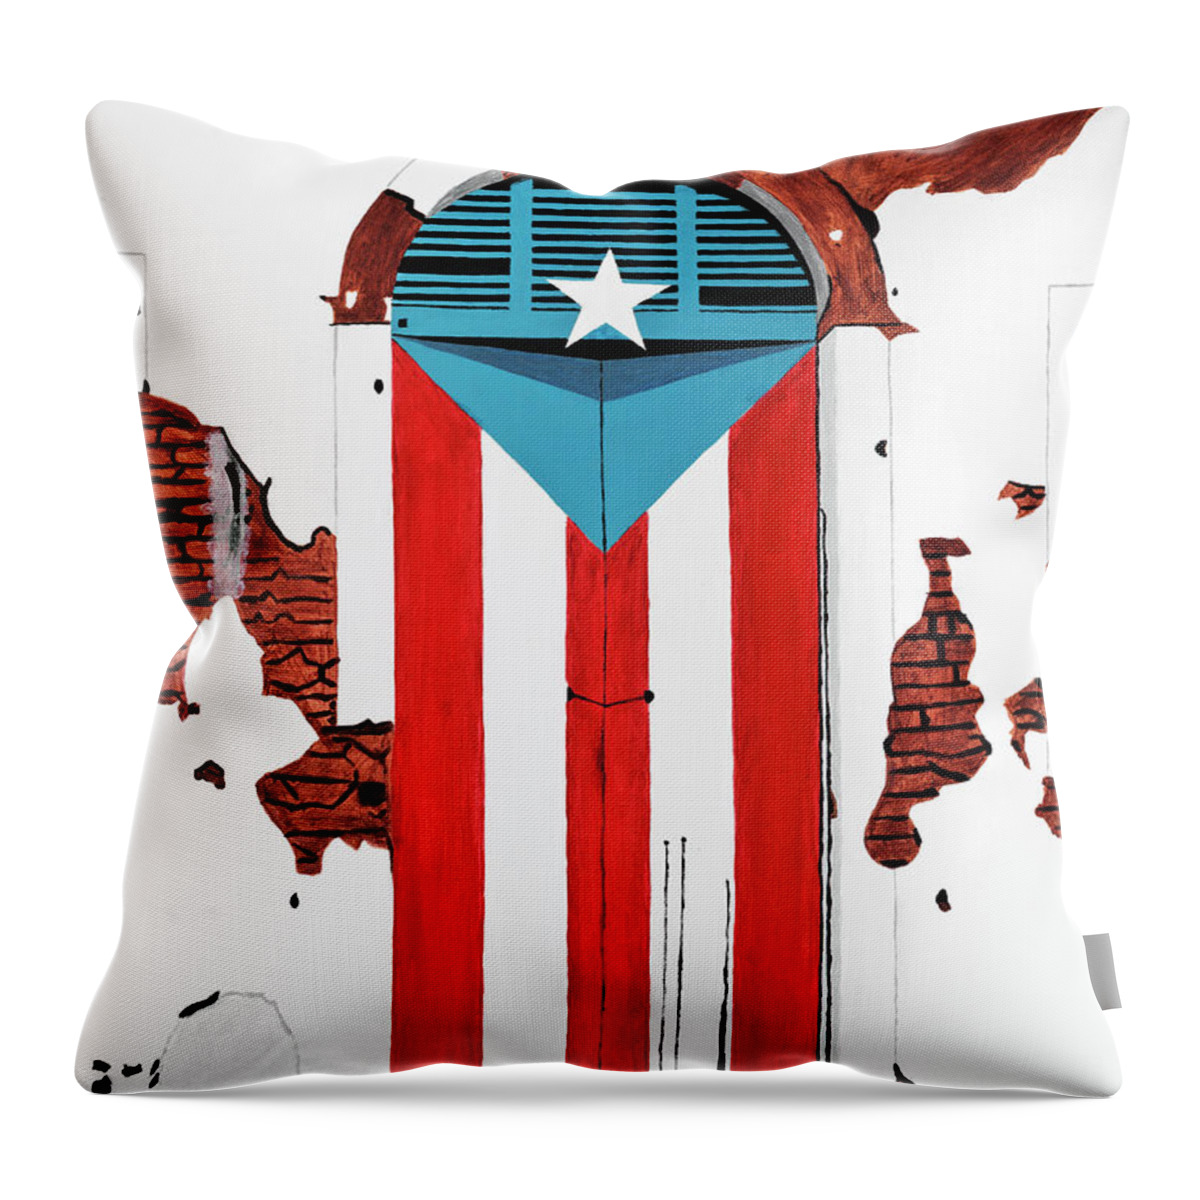 Door Of The Puerto Rico Flag In The City Of San Juan Throw Pillow featuring the painting Puerta Bandera Puerto Rico by Edwin Rivera